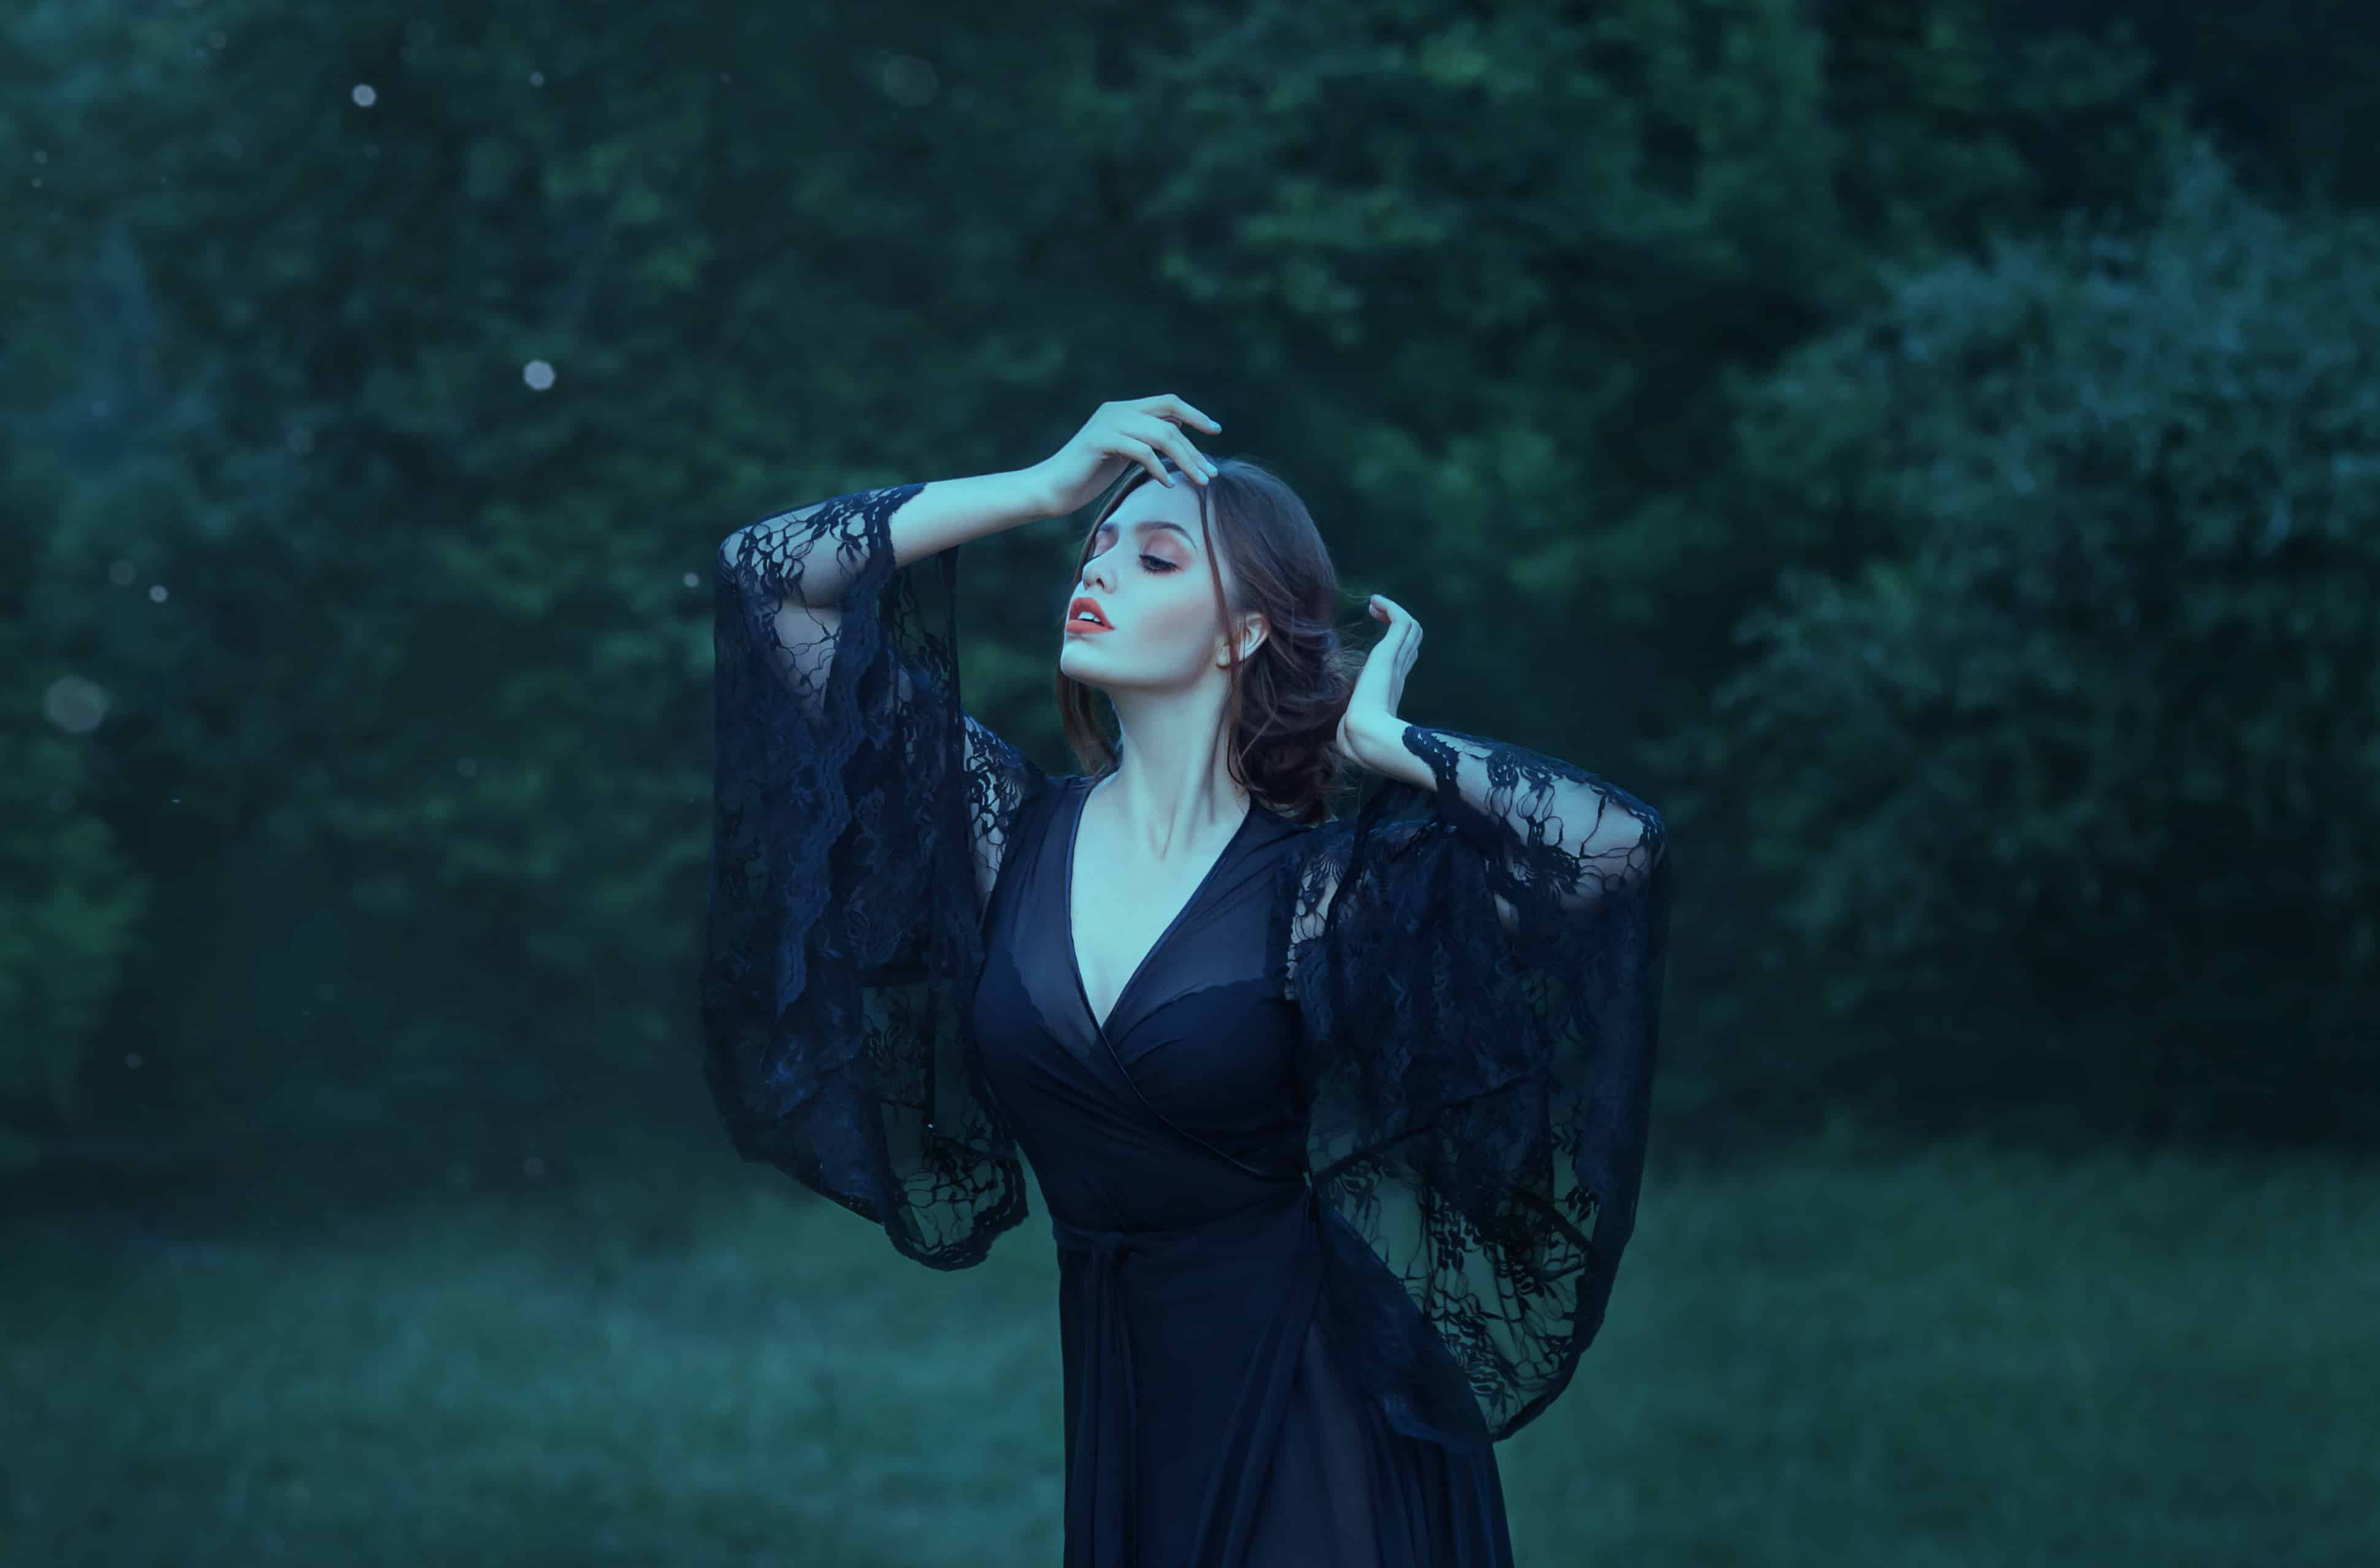 close eyes, girl dancing in the moon light in the dark emerald forest alone. magic. witch. demon. wearing a black long dress with lace sleeves.